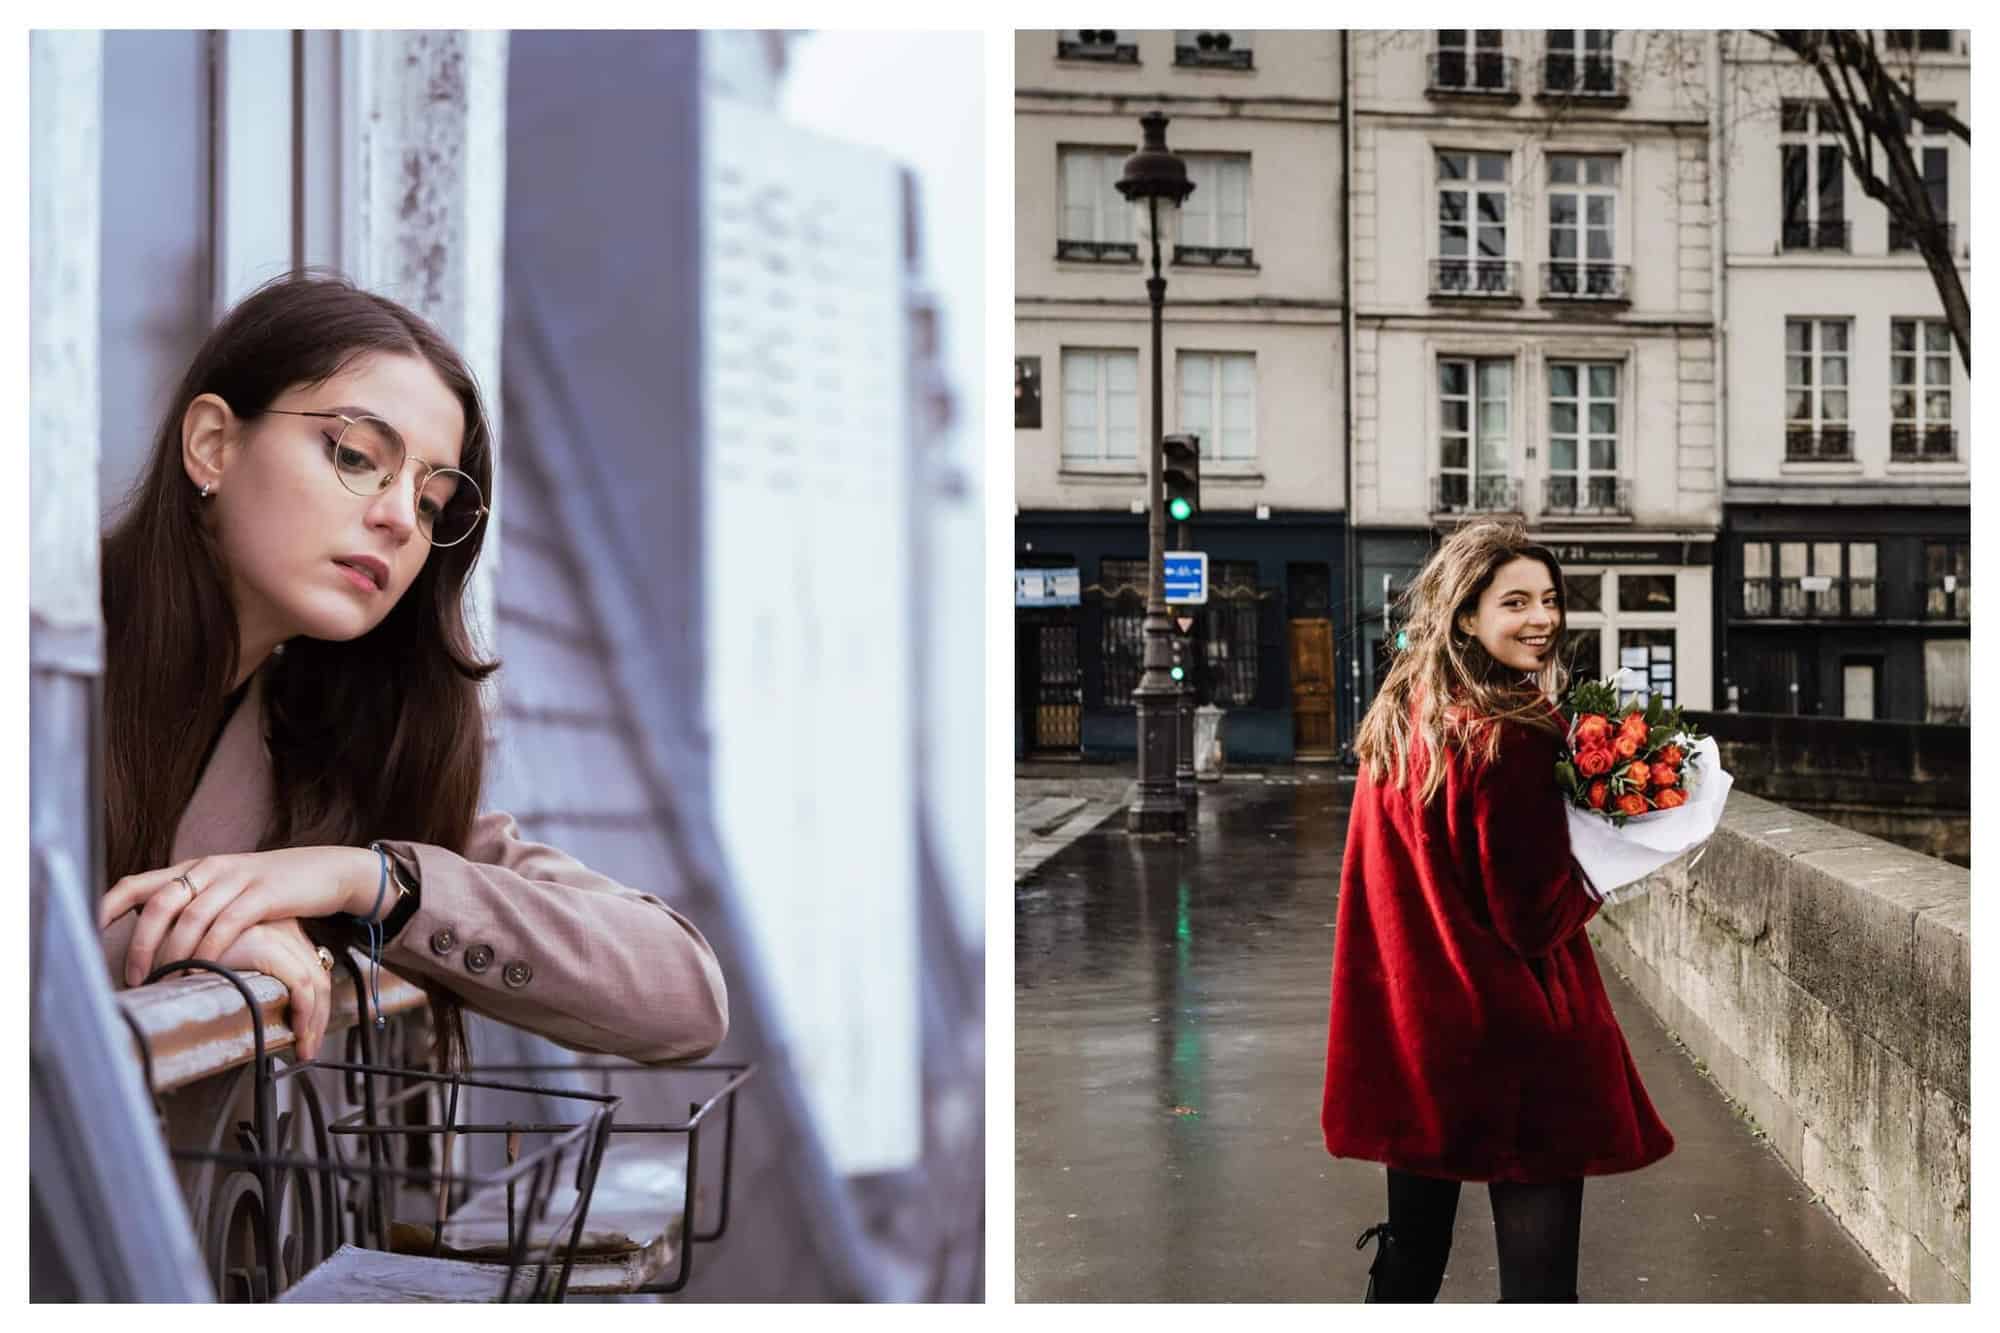 Left: A woman is looking out of a window in a traditional Parisian style apartment. She has long dark hair and is wearing glasses. Right: The same woman is walking in the streets in Paris. She is wearing a red coat and carrying red and orange roses, looking back at the camera. 